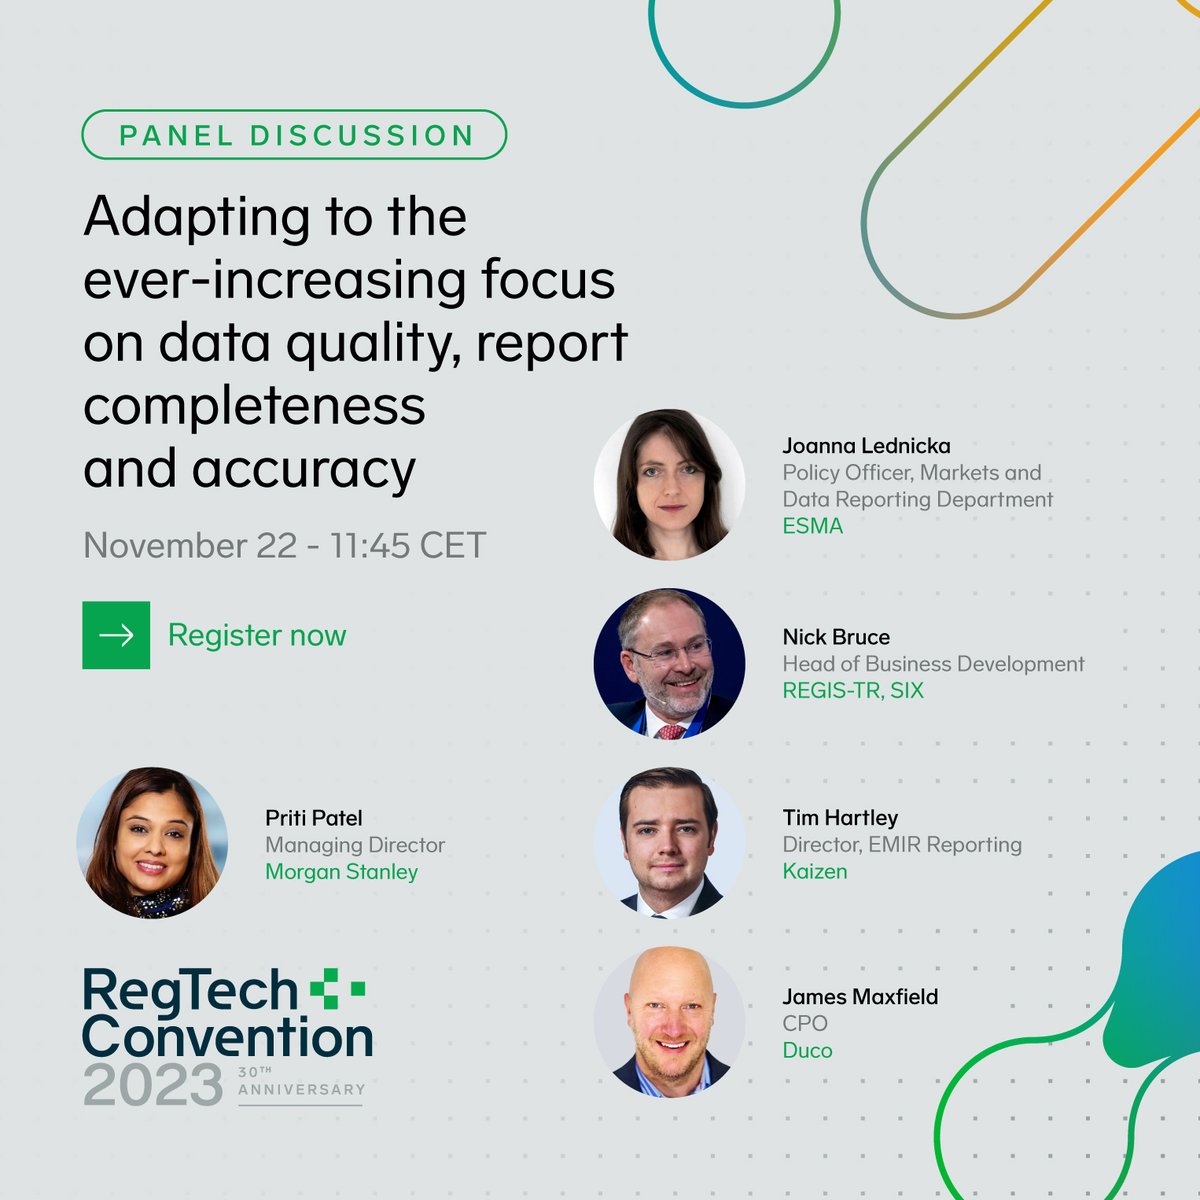 Join our transaction reporting panel at the #RegTechCon to learn more about the challenges around #EMIRRefit, its impact on operational models, and what other regulatory challenges may be on the horizon.

➡️ Register: hubs.la/Q0281YHX0